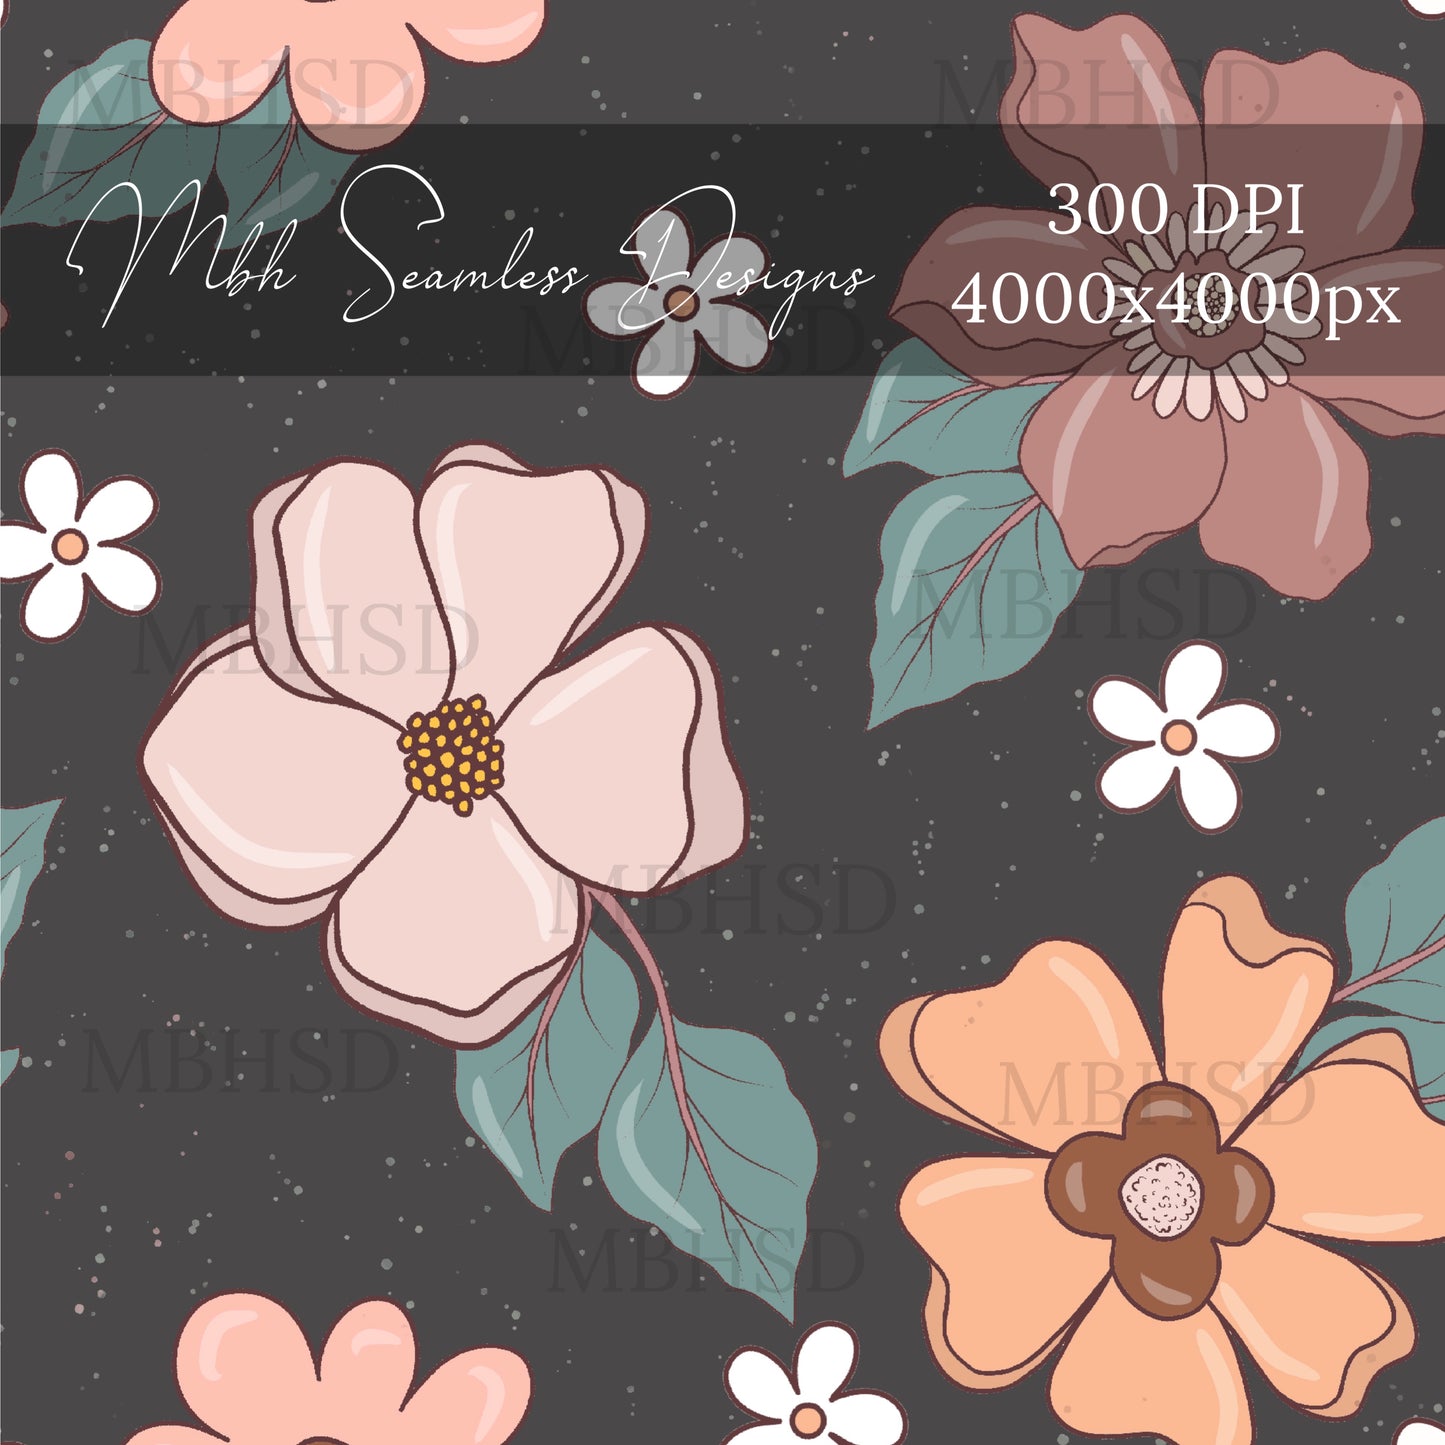 Speckled Autumn Flowers ASSORTED COLORWAYS Seamless Pattern